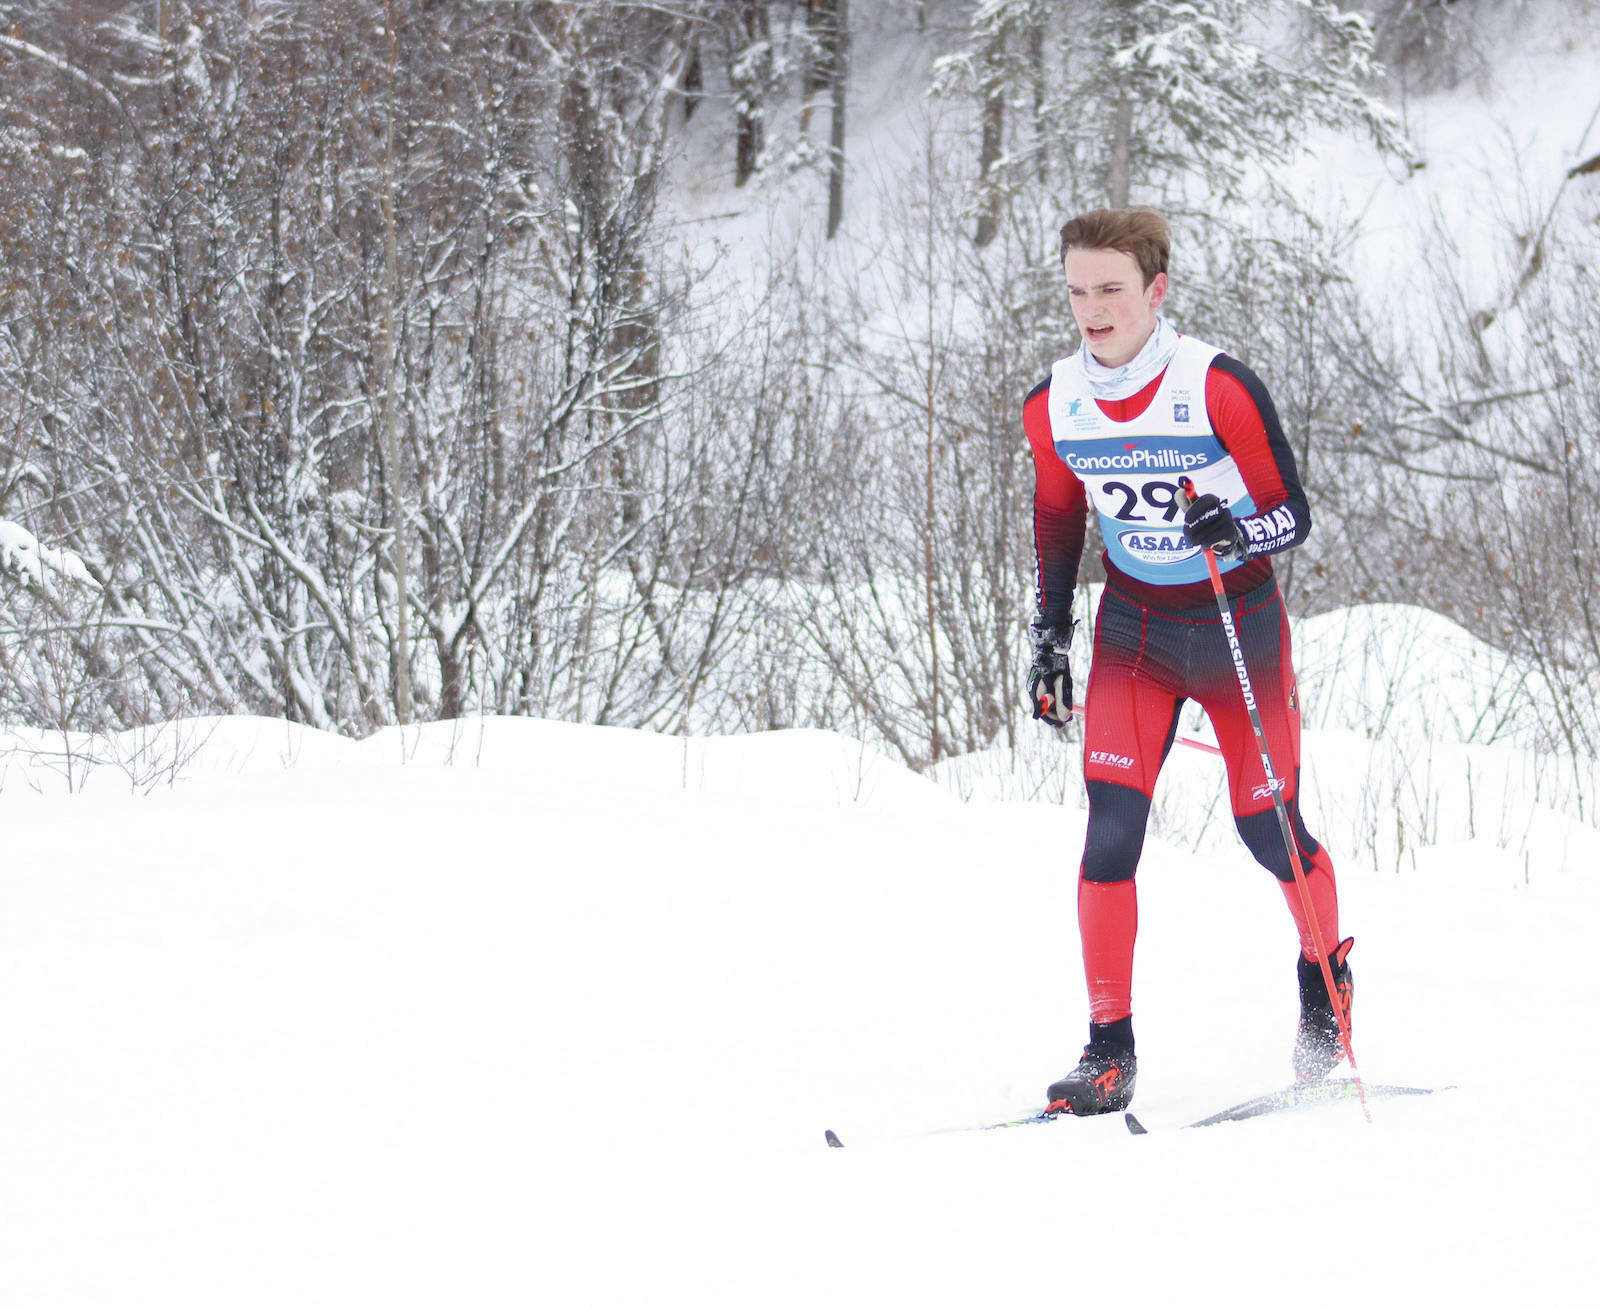 Kenai Central’s Tyler Hippchen competes at the state Nordic ski meet Thursday, Feb. 25, 2021, at Government Peak Recreation Area just north of Palmer, Alaska. (Photo by Tim Rockey/Frontiersman)